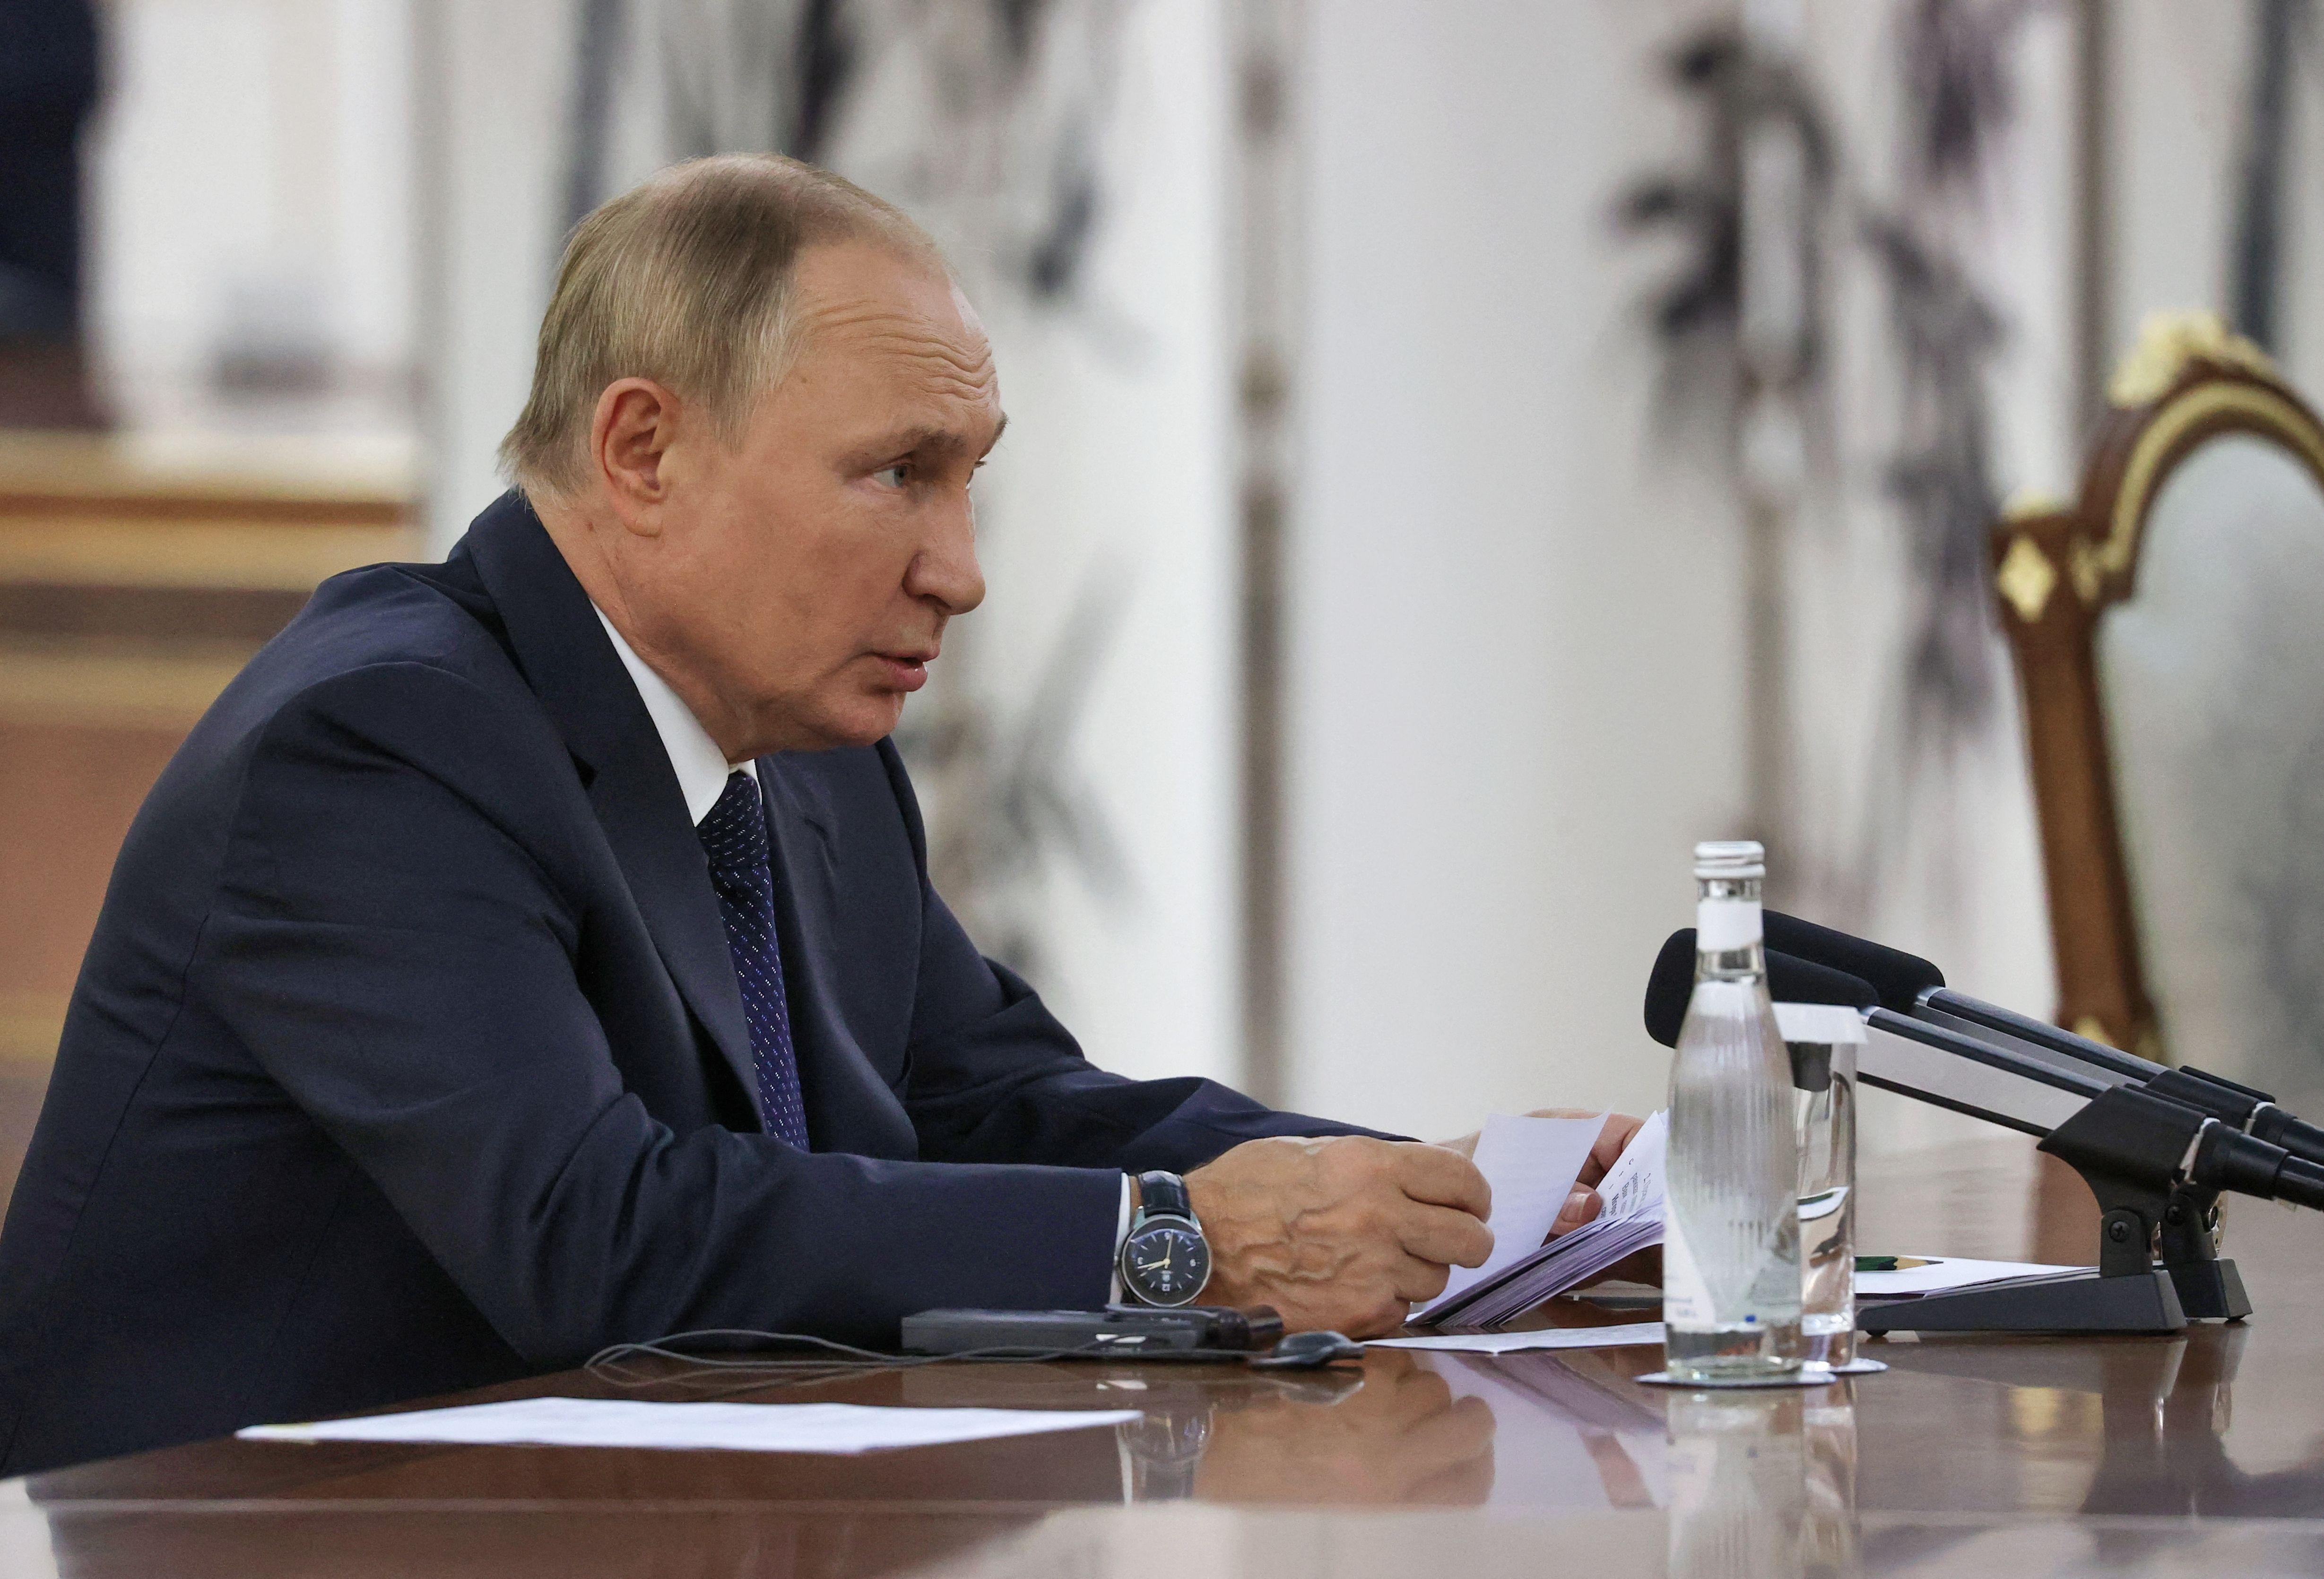 Putin sits hunched with an opened bottle of bottled water in front of him.